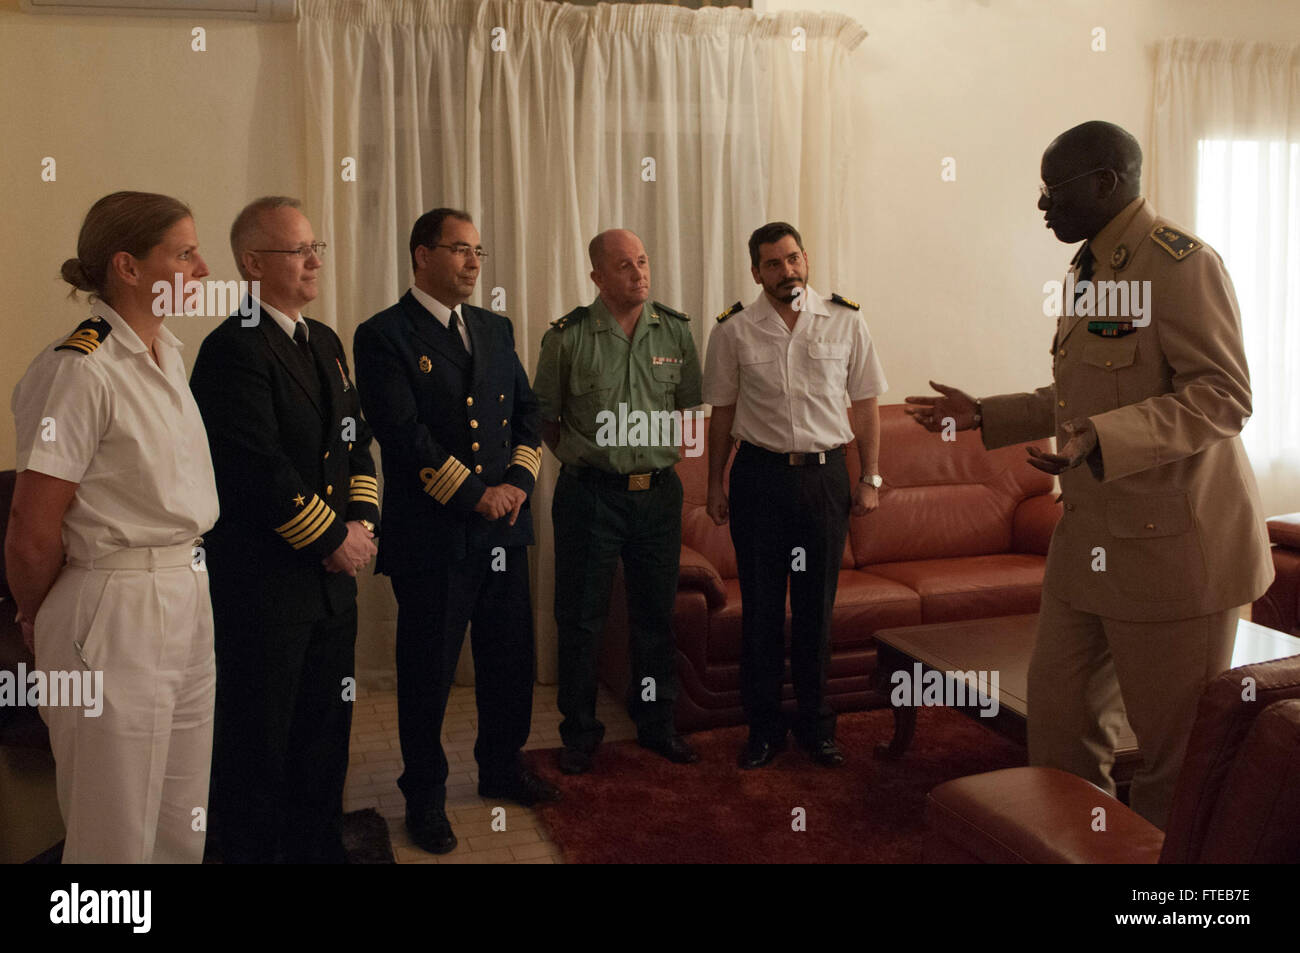 DAKAR, Senegal (March 7, 2014) Senegalese Rear Admiral Cheikh Bara Cissoko, chief of naval staff,  addresses the commanding officers of vessels participating in Exercise Saharan Express 2014. Saharan Express is an annual international maritime security cooperation exercise designed to improve maritime safety and security in West Africa. (U.S. Navy photo by Mass Communication Specialist 1st Class David R. Krigbaum/ Released) Stock Photo